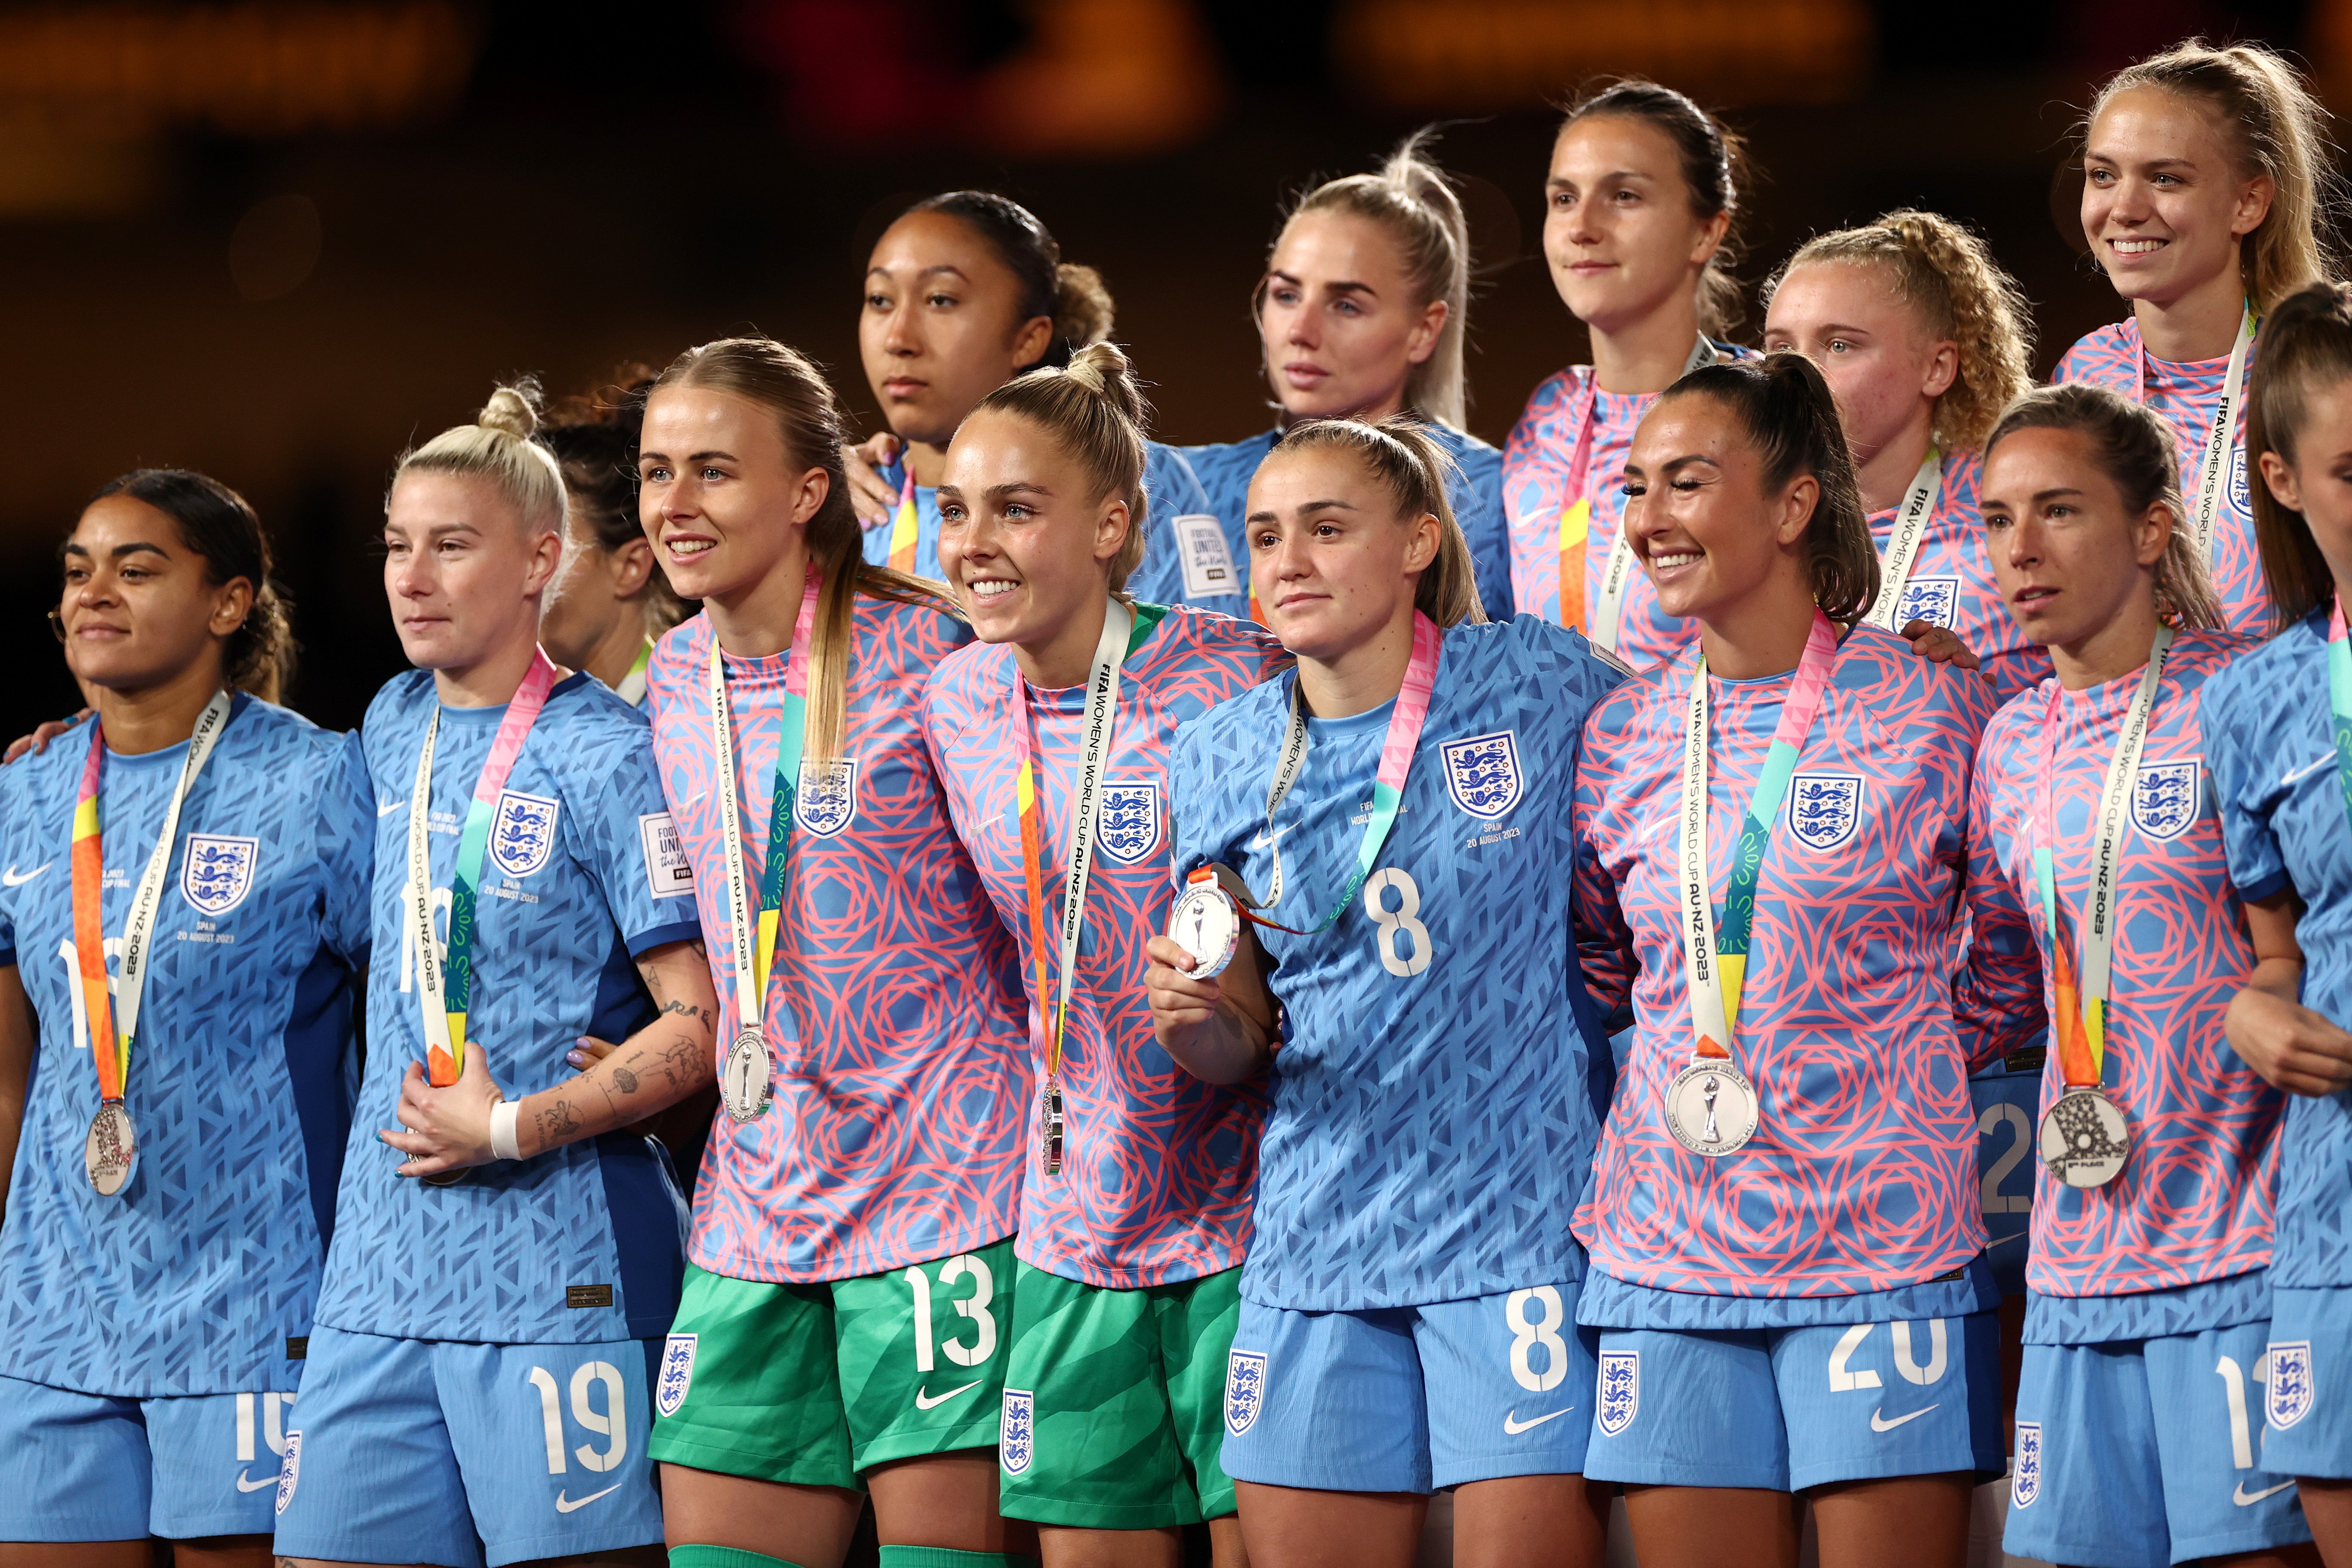 The Lionesses finished as runners up in the Women’s World Cup